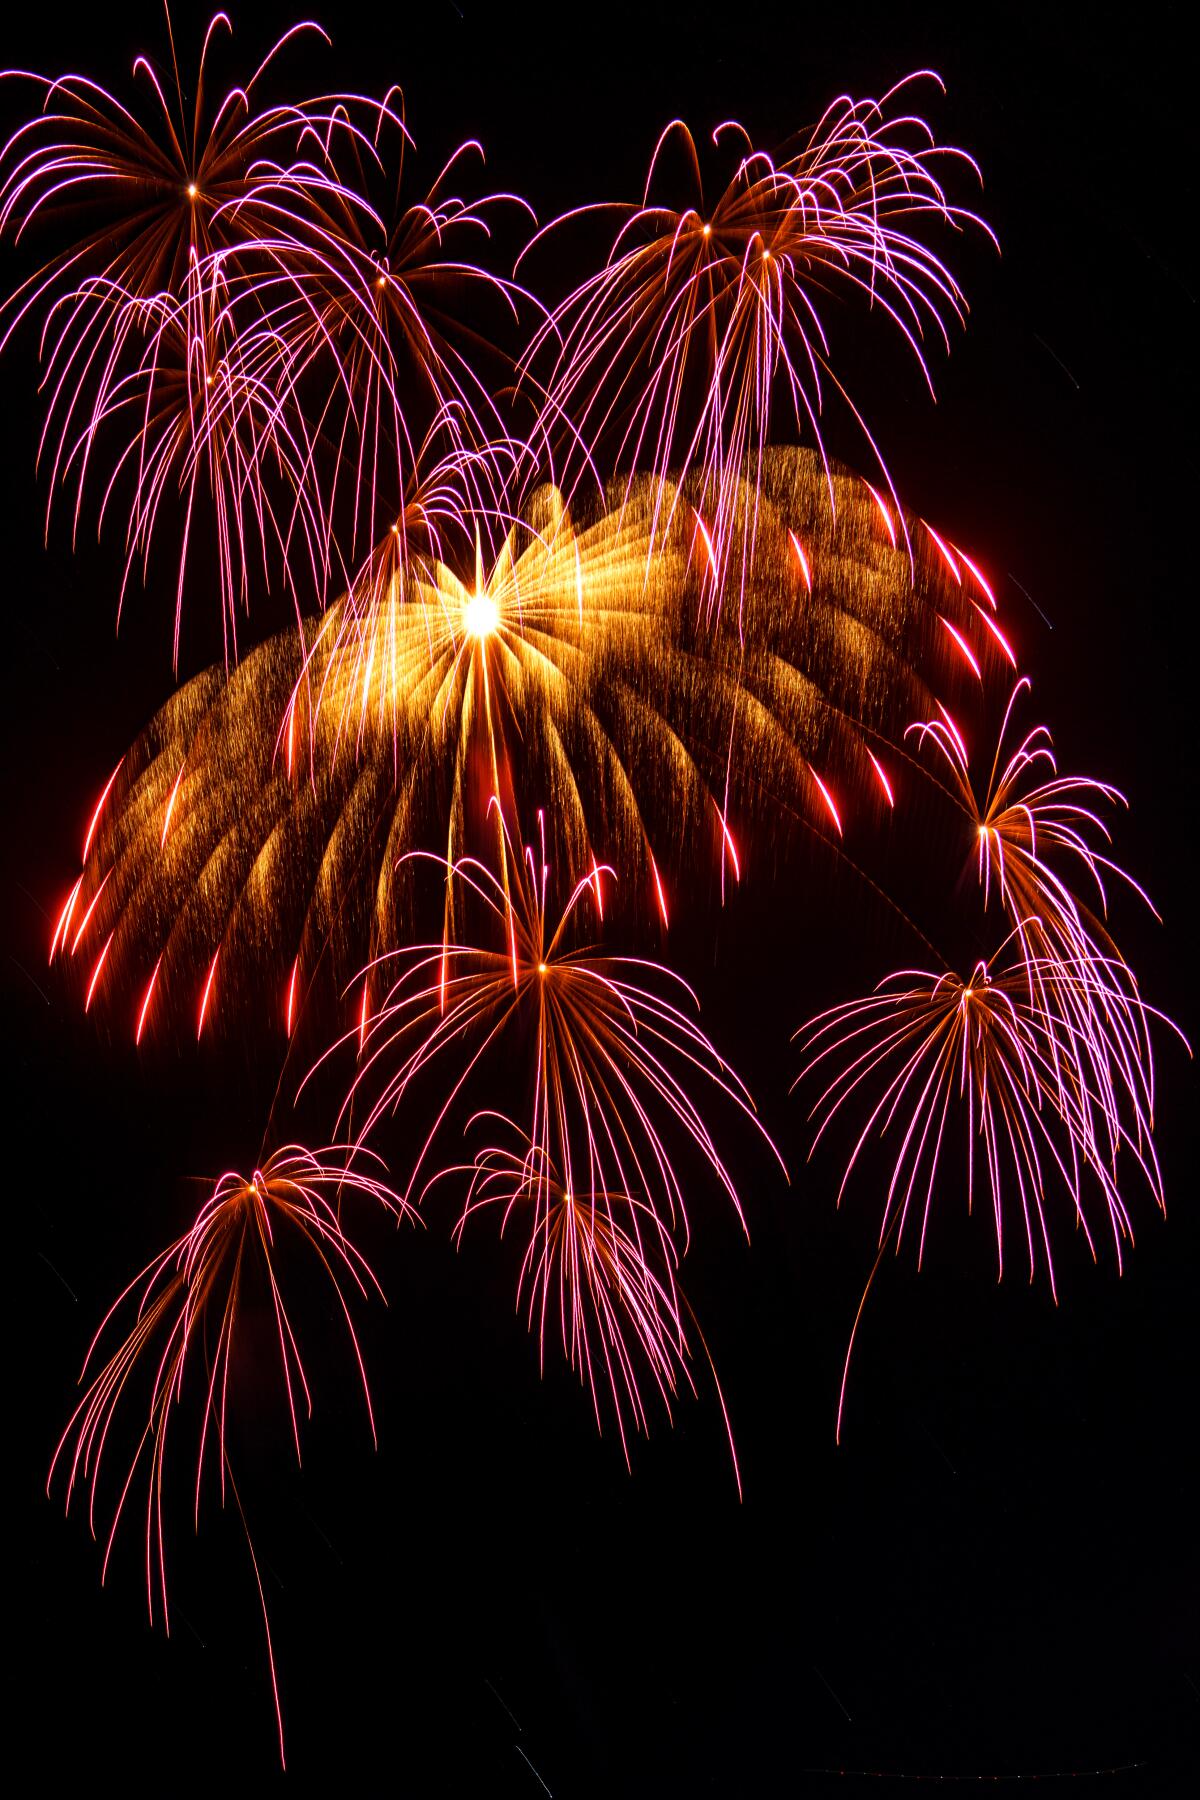 Multiple purple and gold fireworks explode in the night.